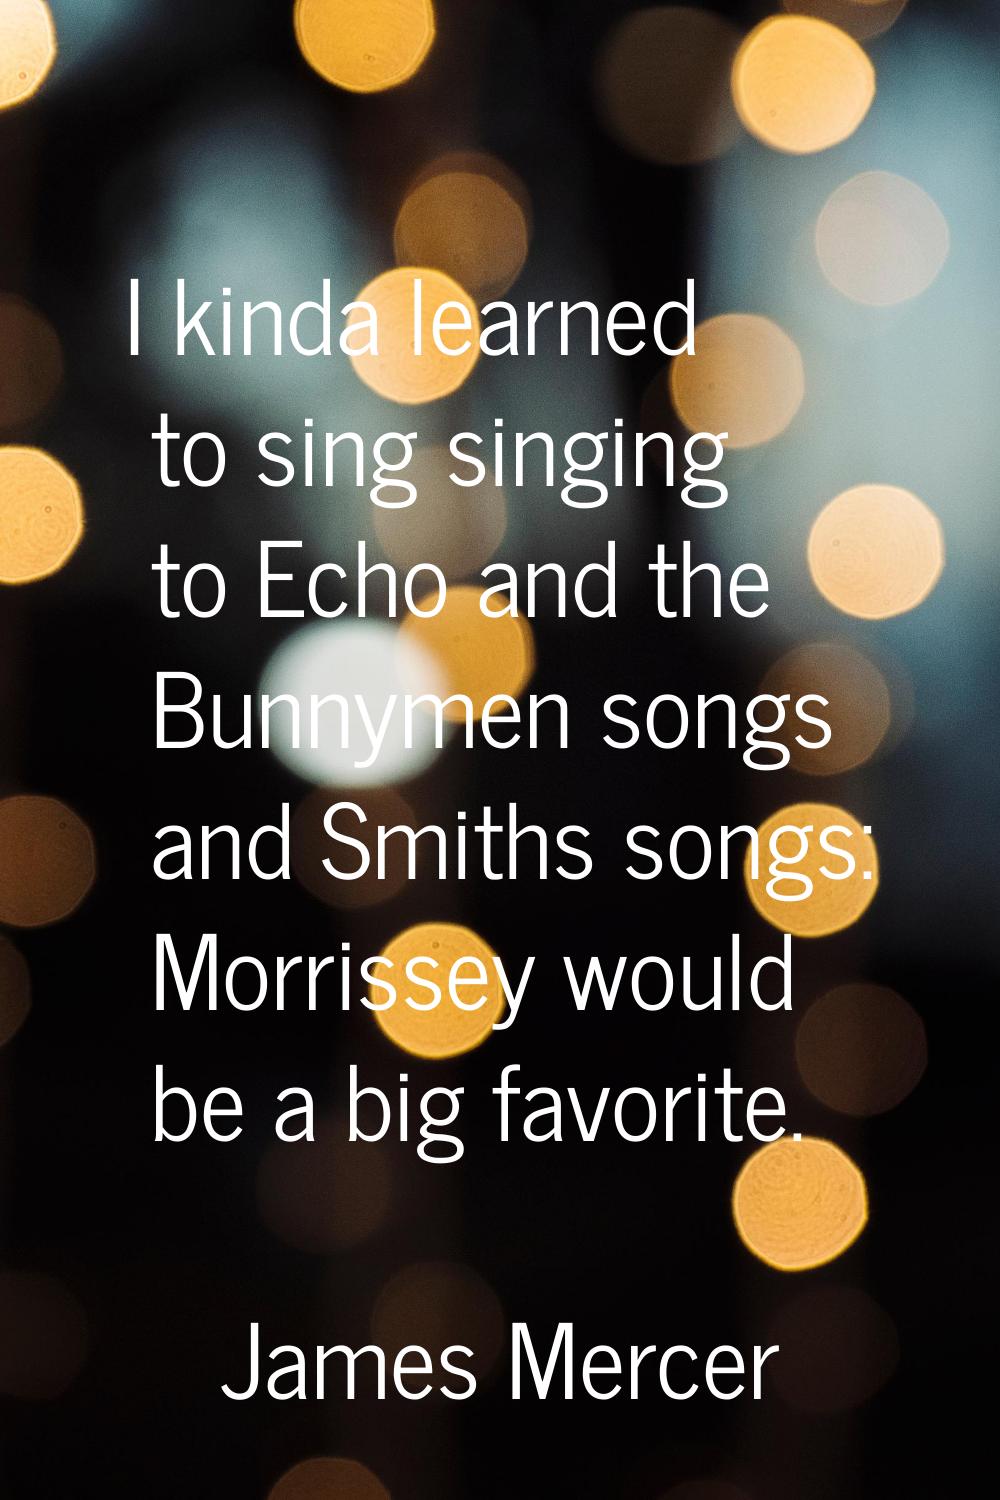 I kinda learned to sing singing to Echo and the Bunnymen songs and Smiths songs: Morrissey would be